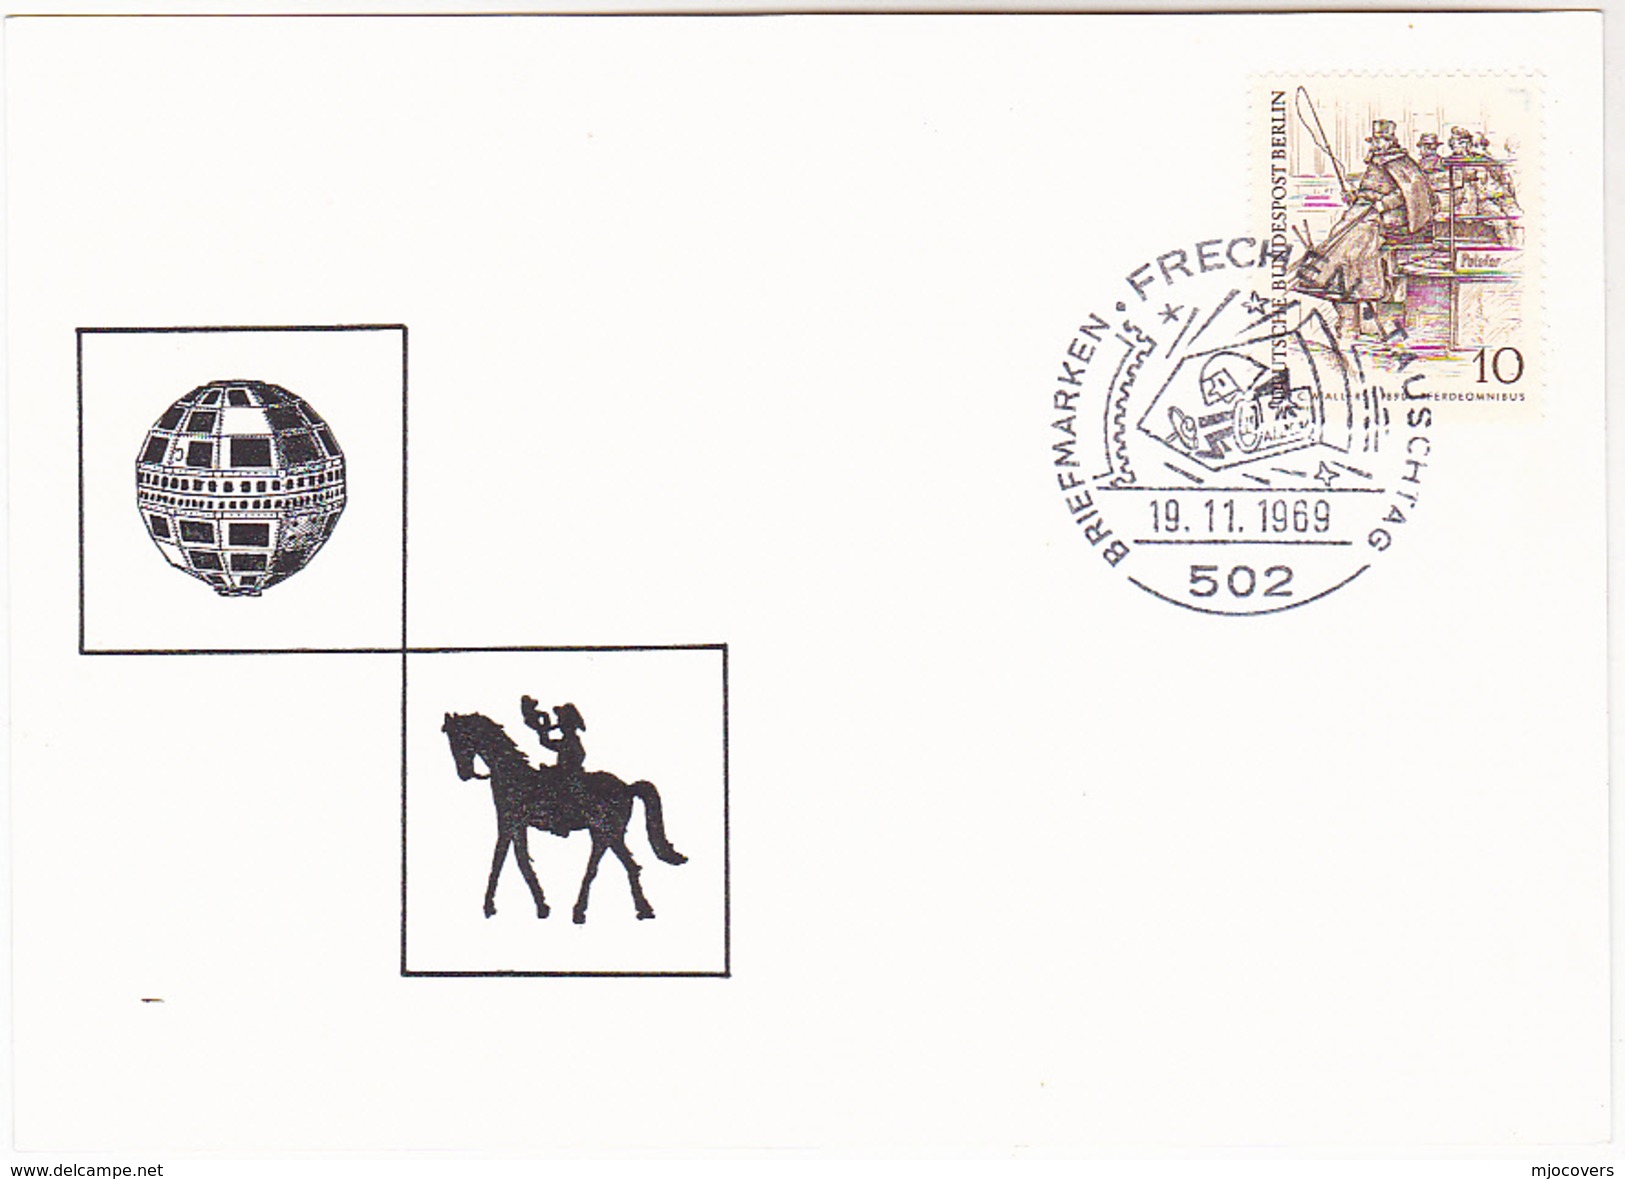 1969 Frechen SPACE EVENT COVER Card Germany Stamps - Europe